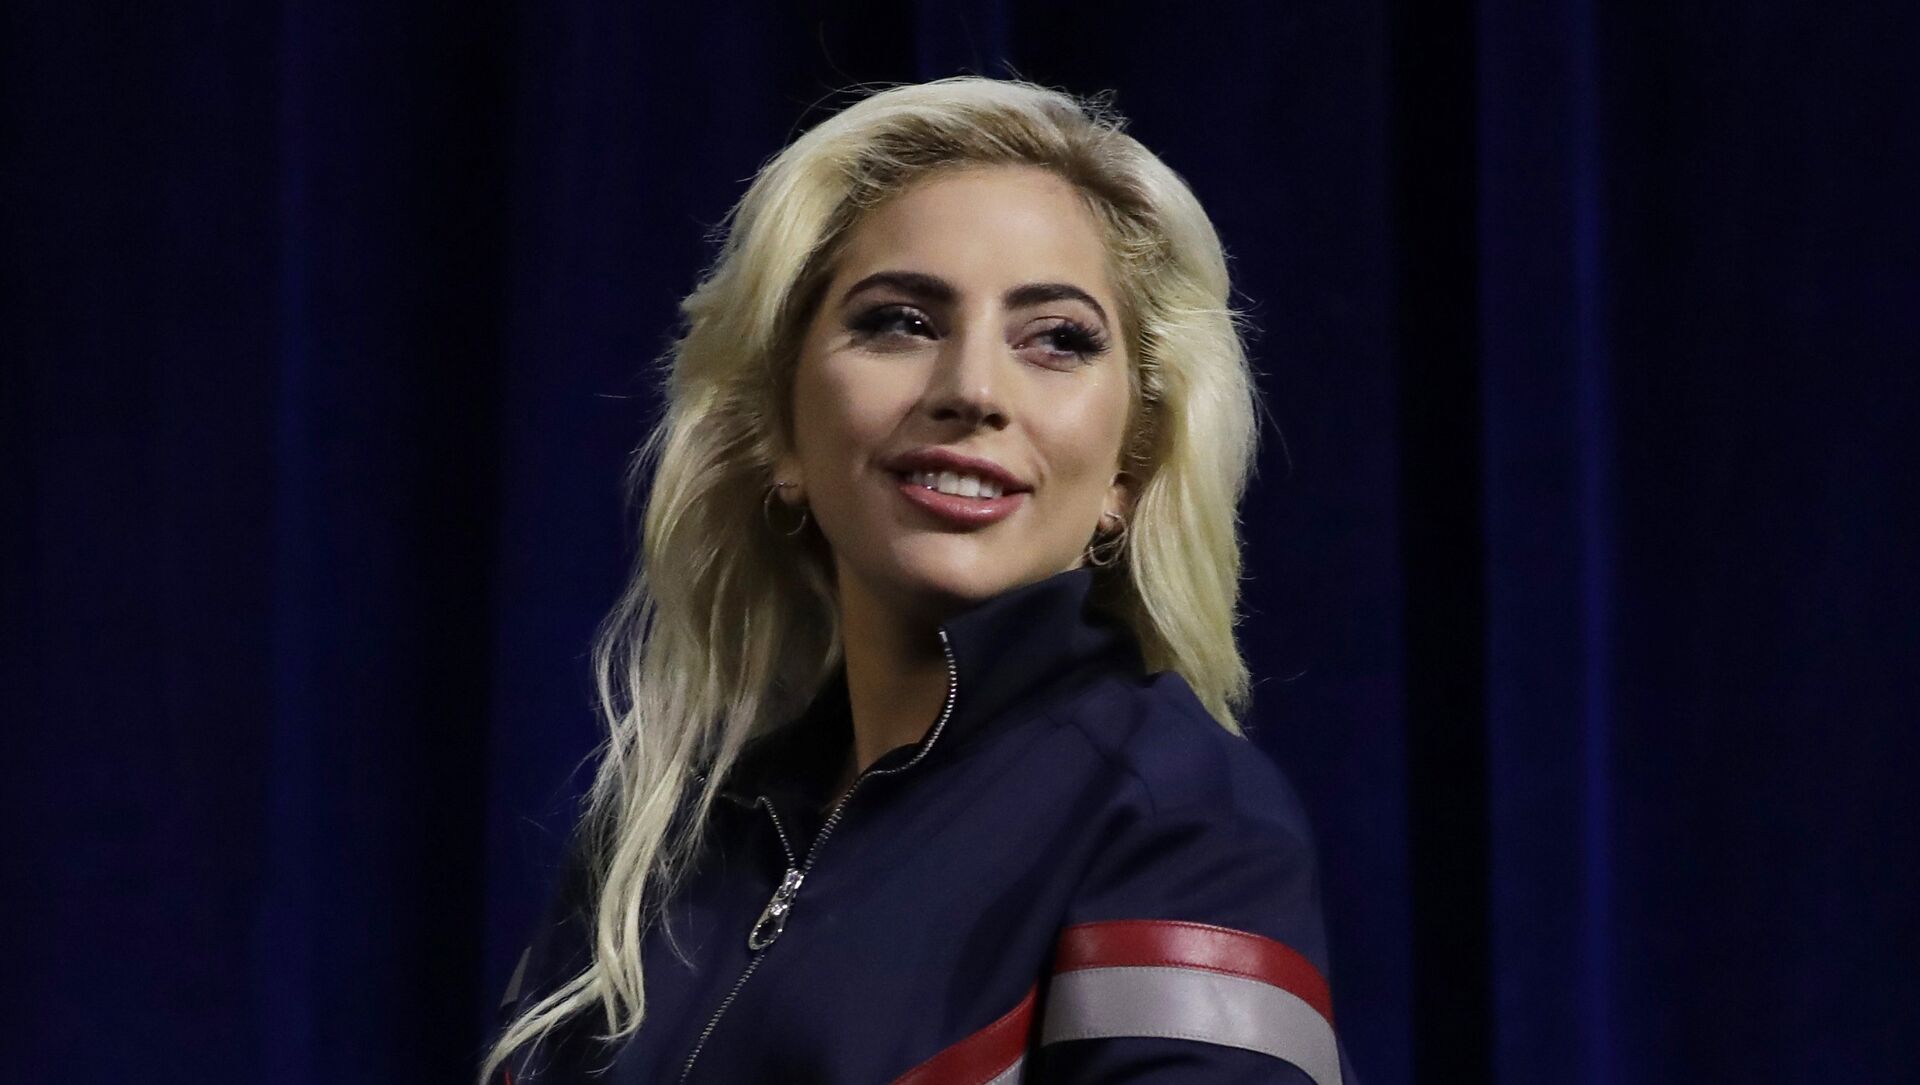 This Feb. 2, 2017 file photo shows Lady Gaga at a news conference for the NFL Super Bowl 51 football game in Houston. - Sputnik 日本, 1920, 27.02.2021